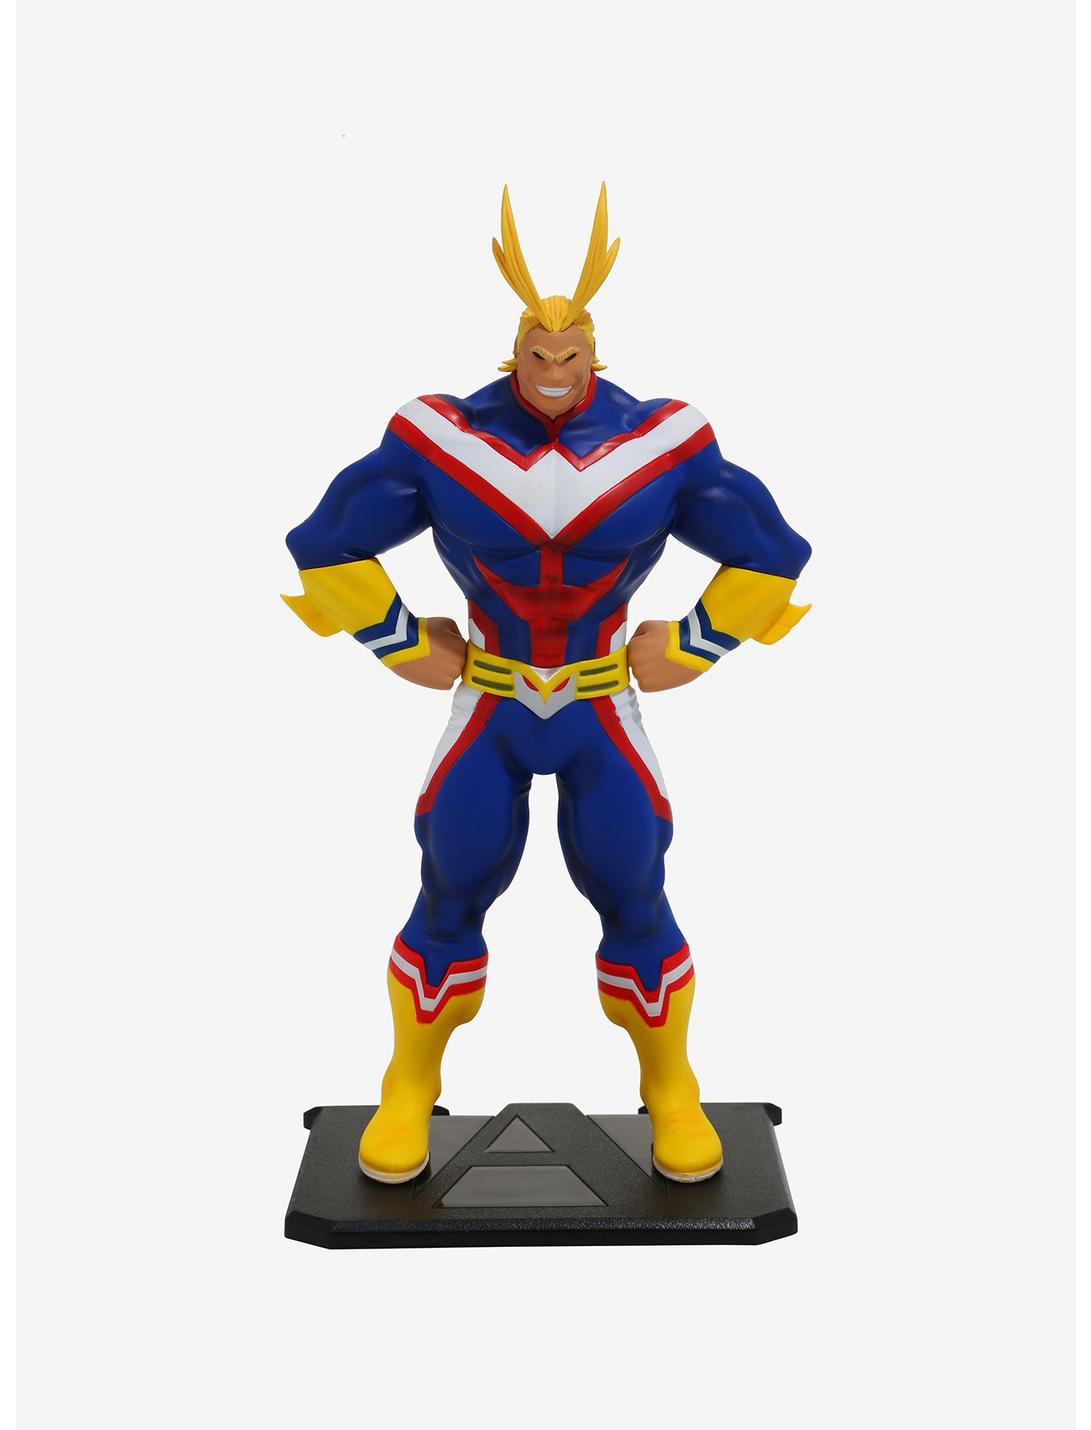 ABYStyle My Hero Academia Super Figure Collection All Might Collectible Figure, , hi-res